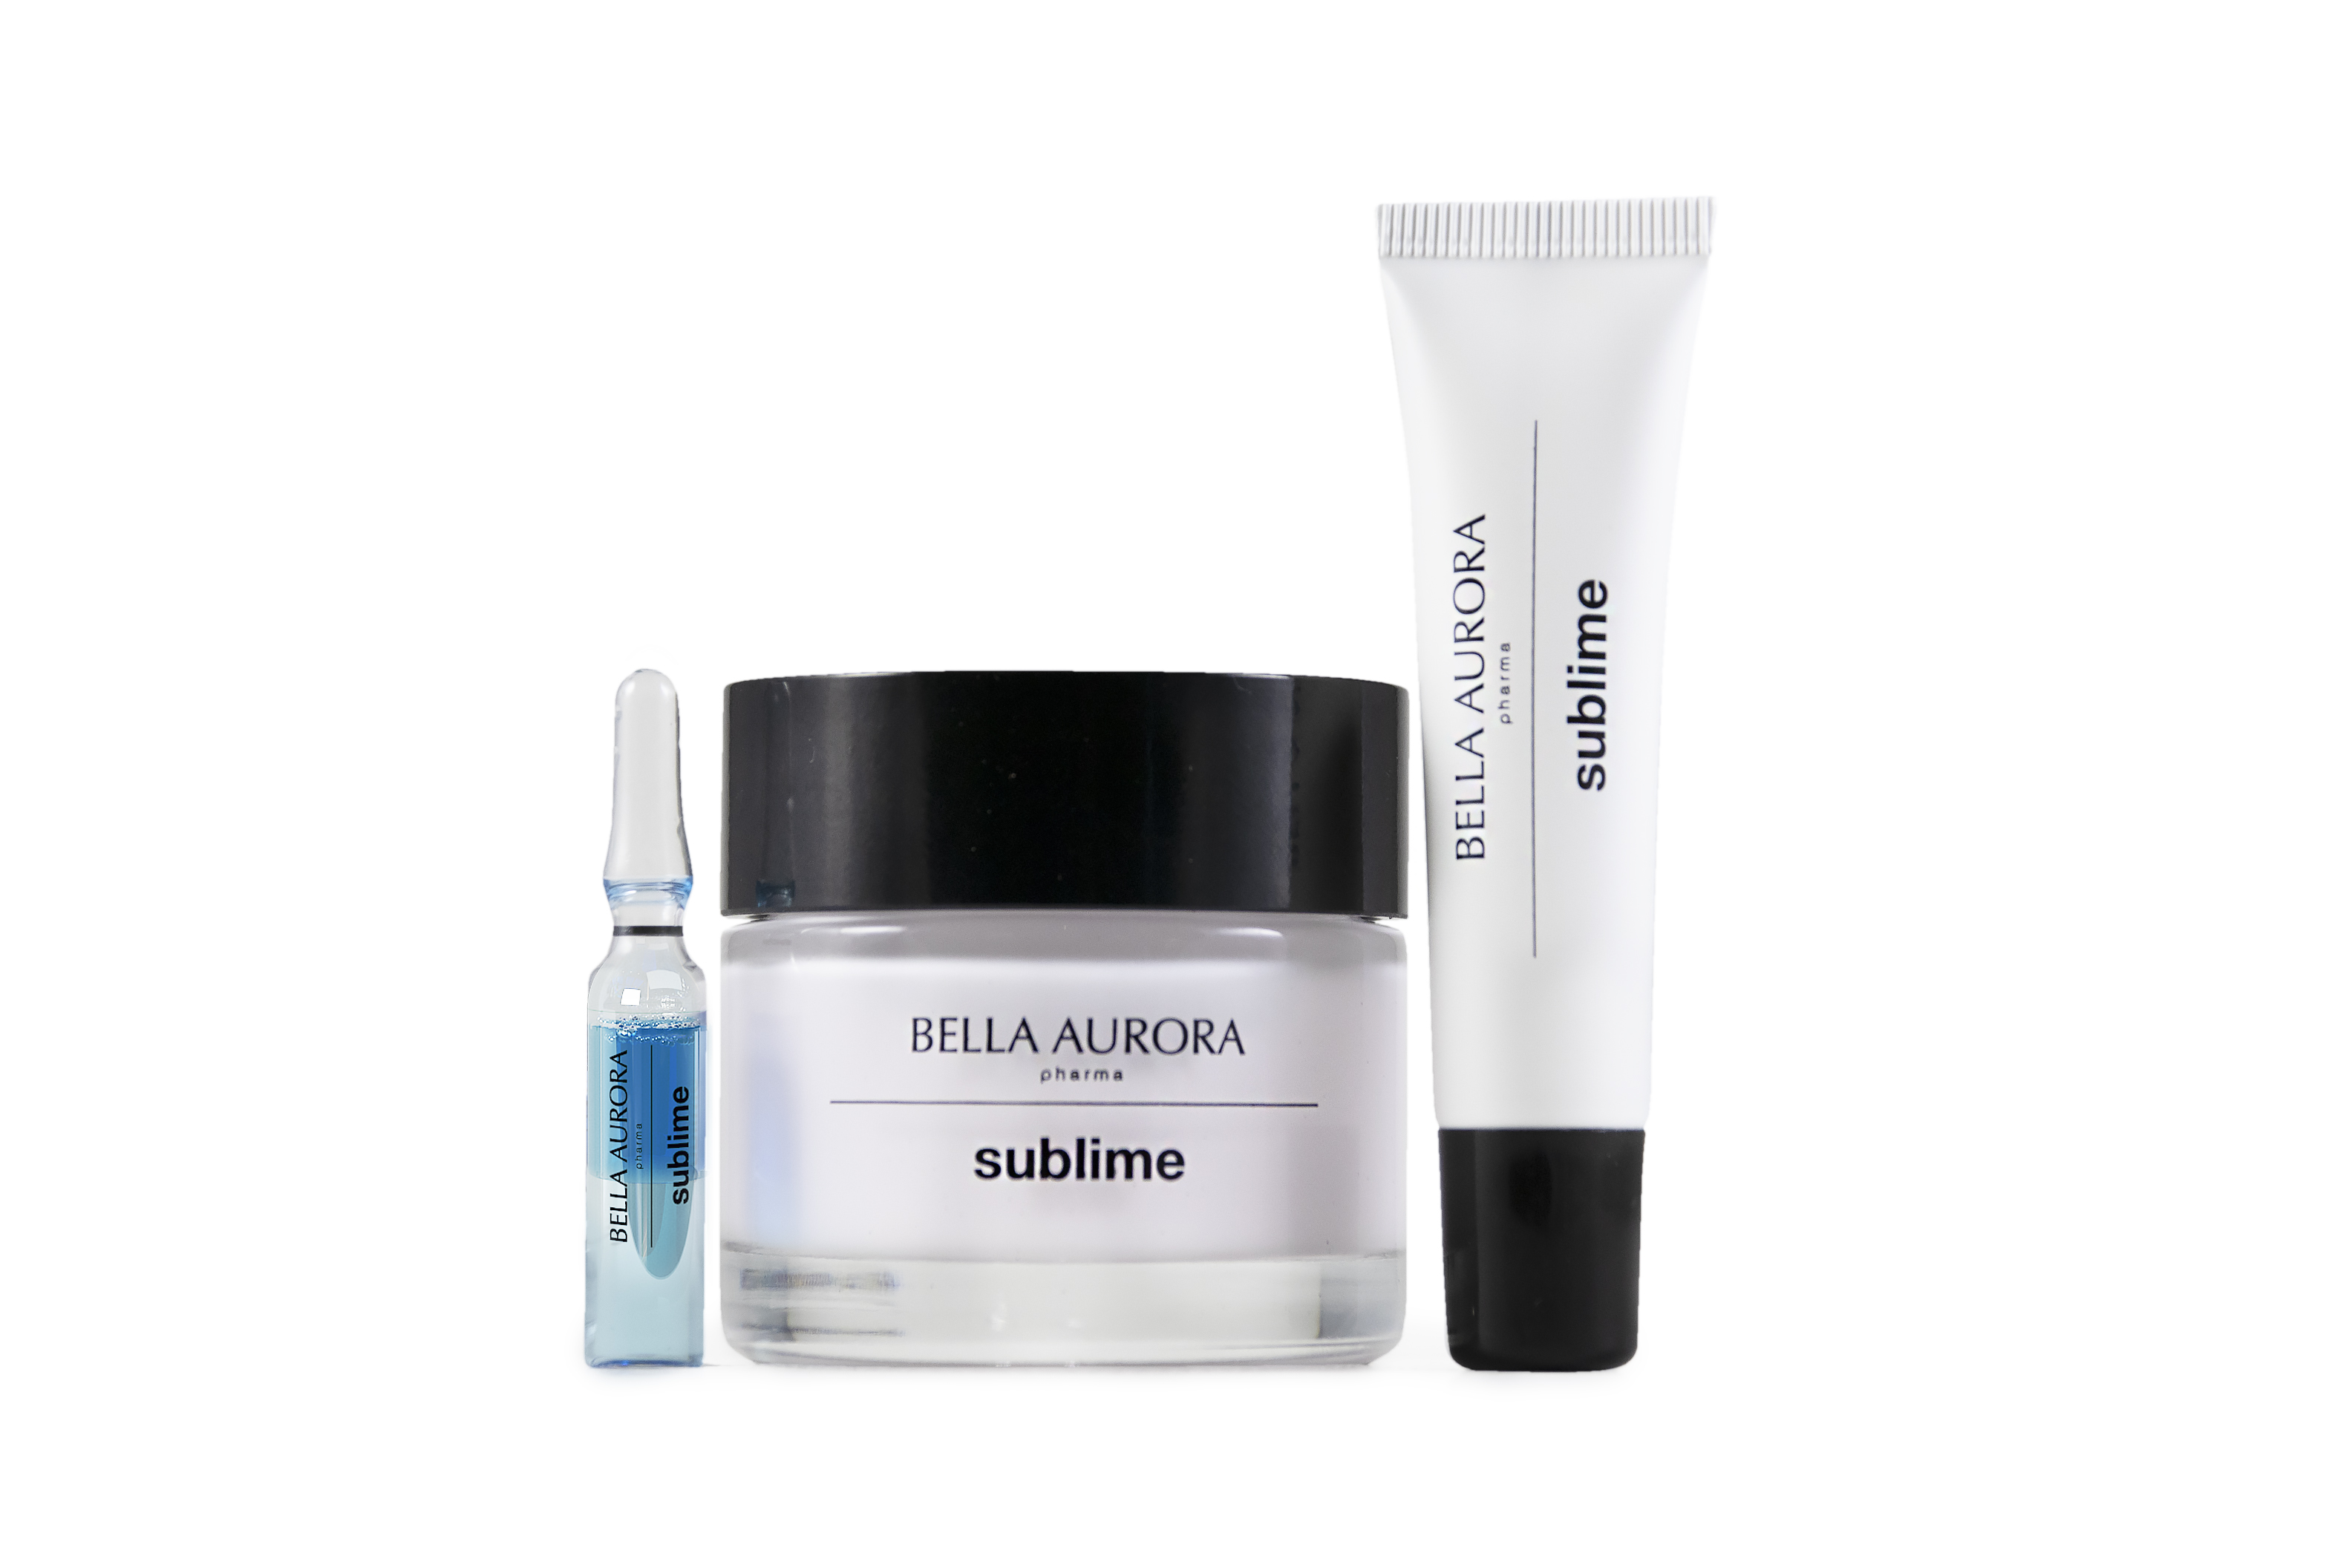 Sublime, Bella Aurora’s new anti-ageing range, is here